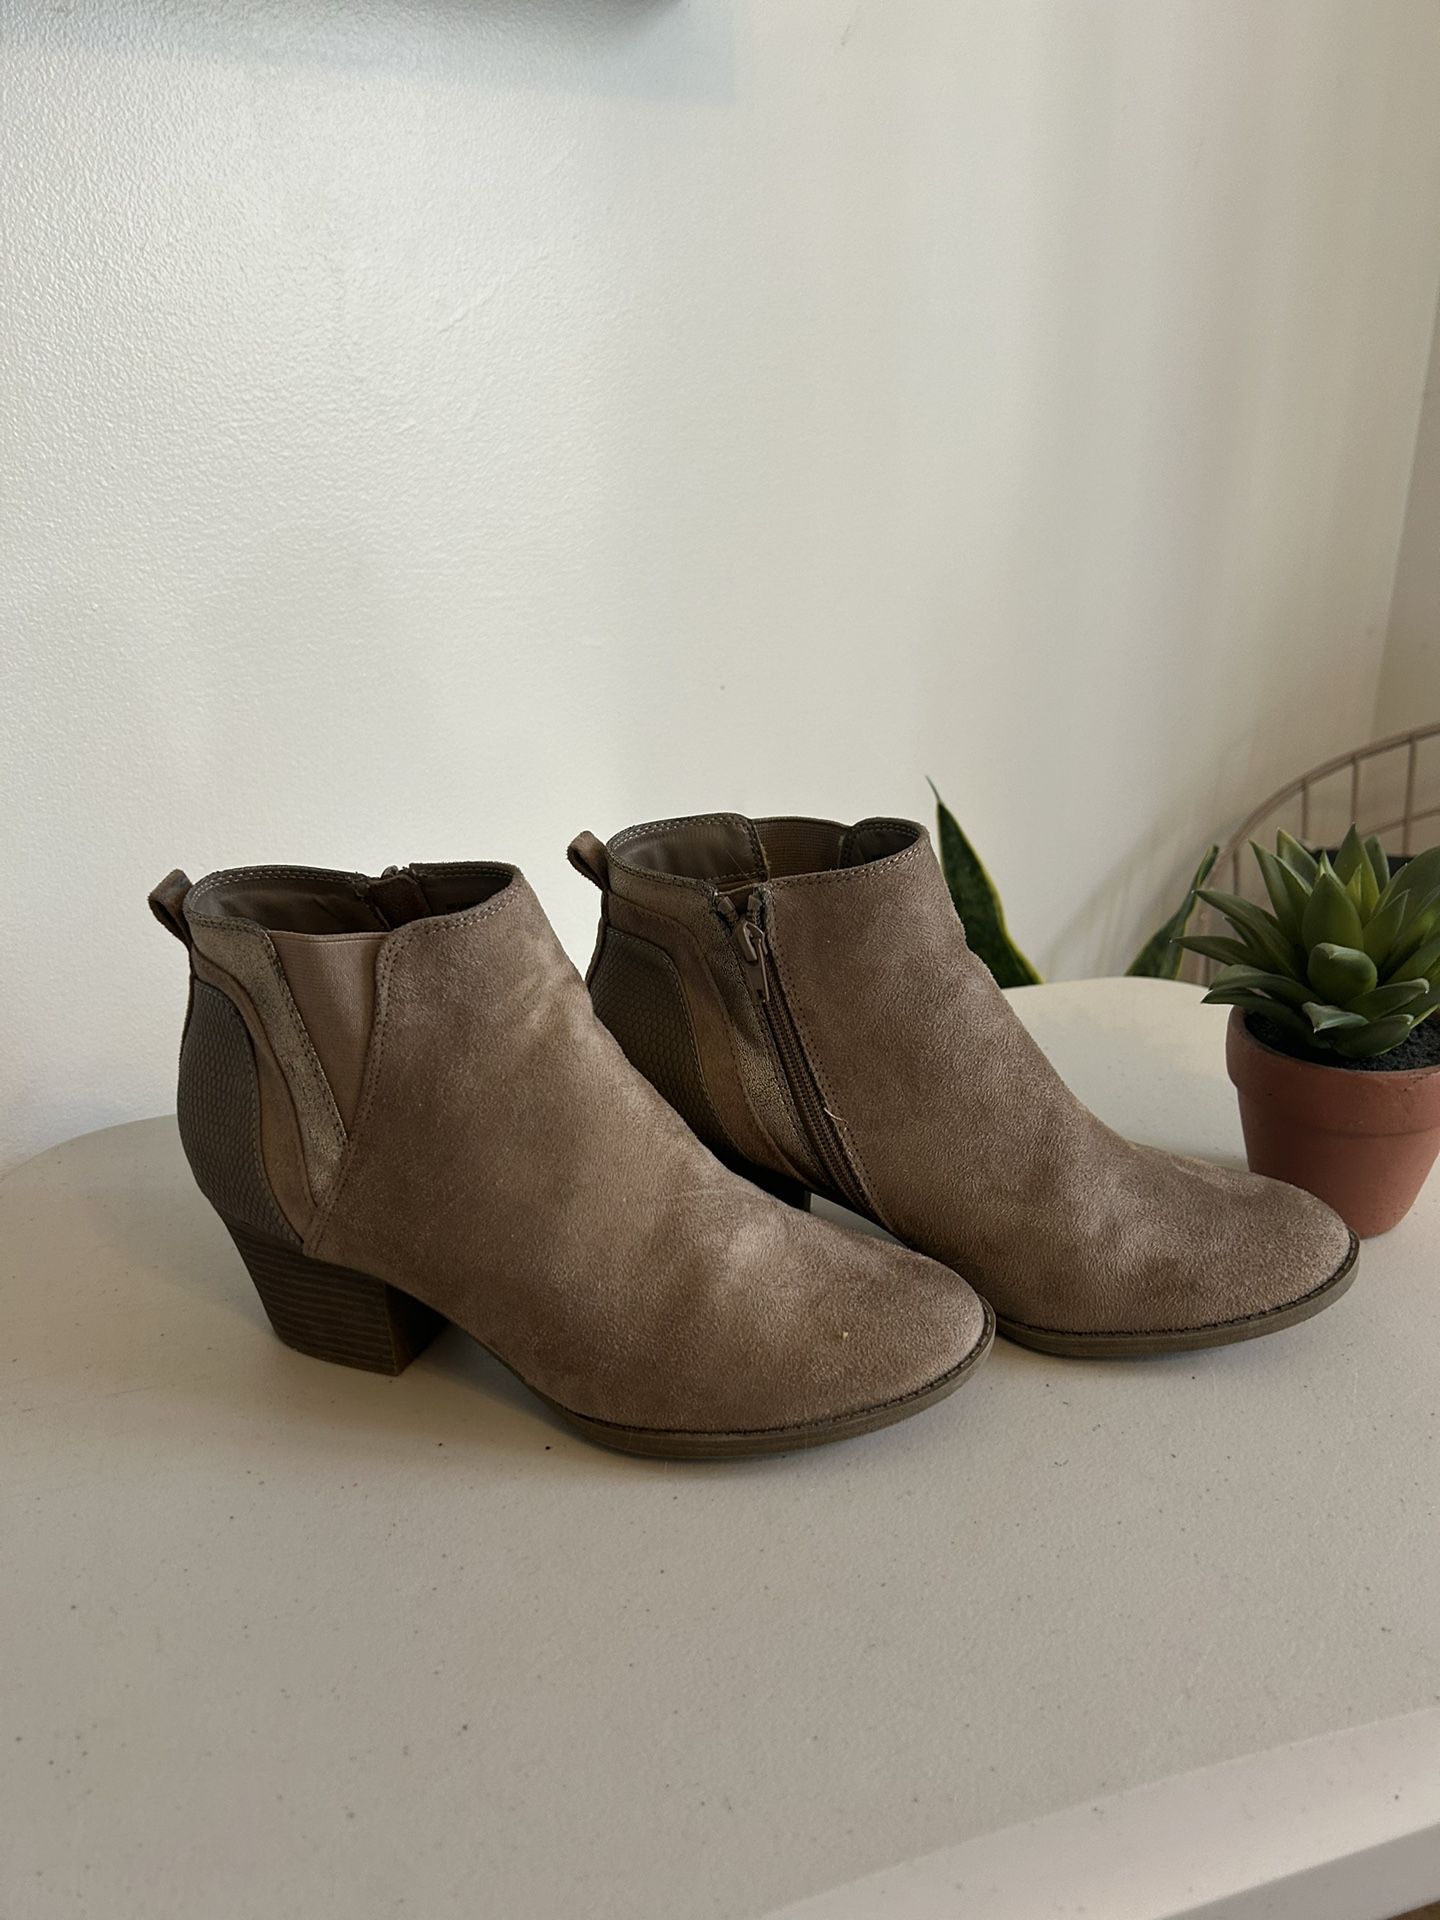 Ladies size 10 tan suede boots with heel-faded glory-like new